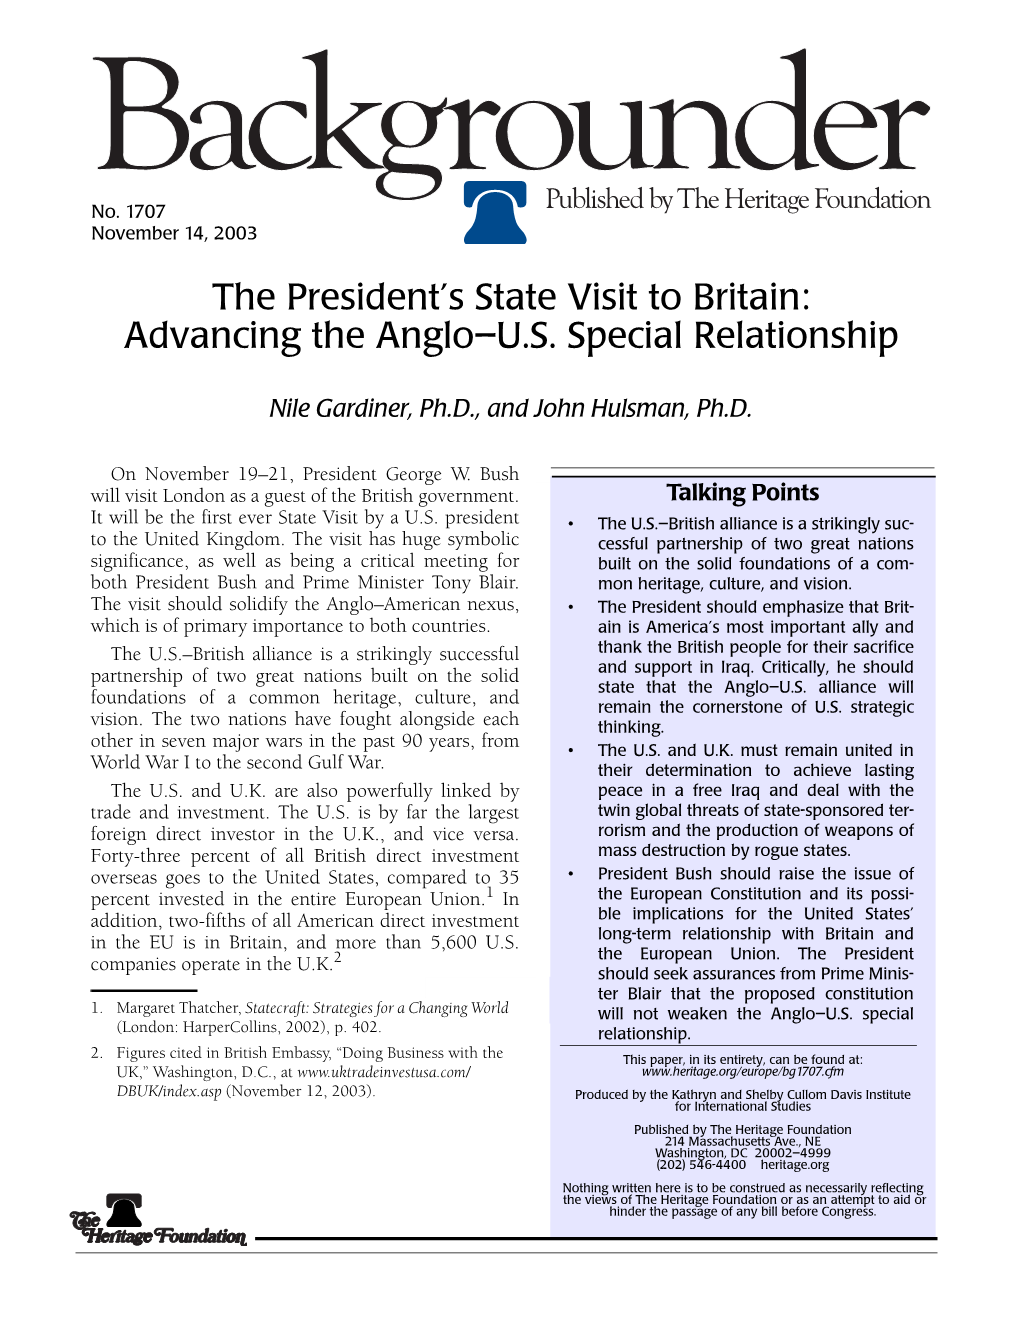 The President's State Visit to Britain: Advancing the Anglo–U.S. Special